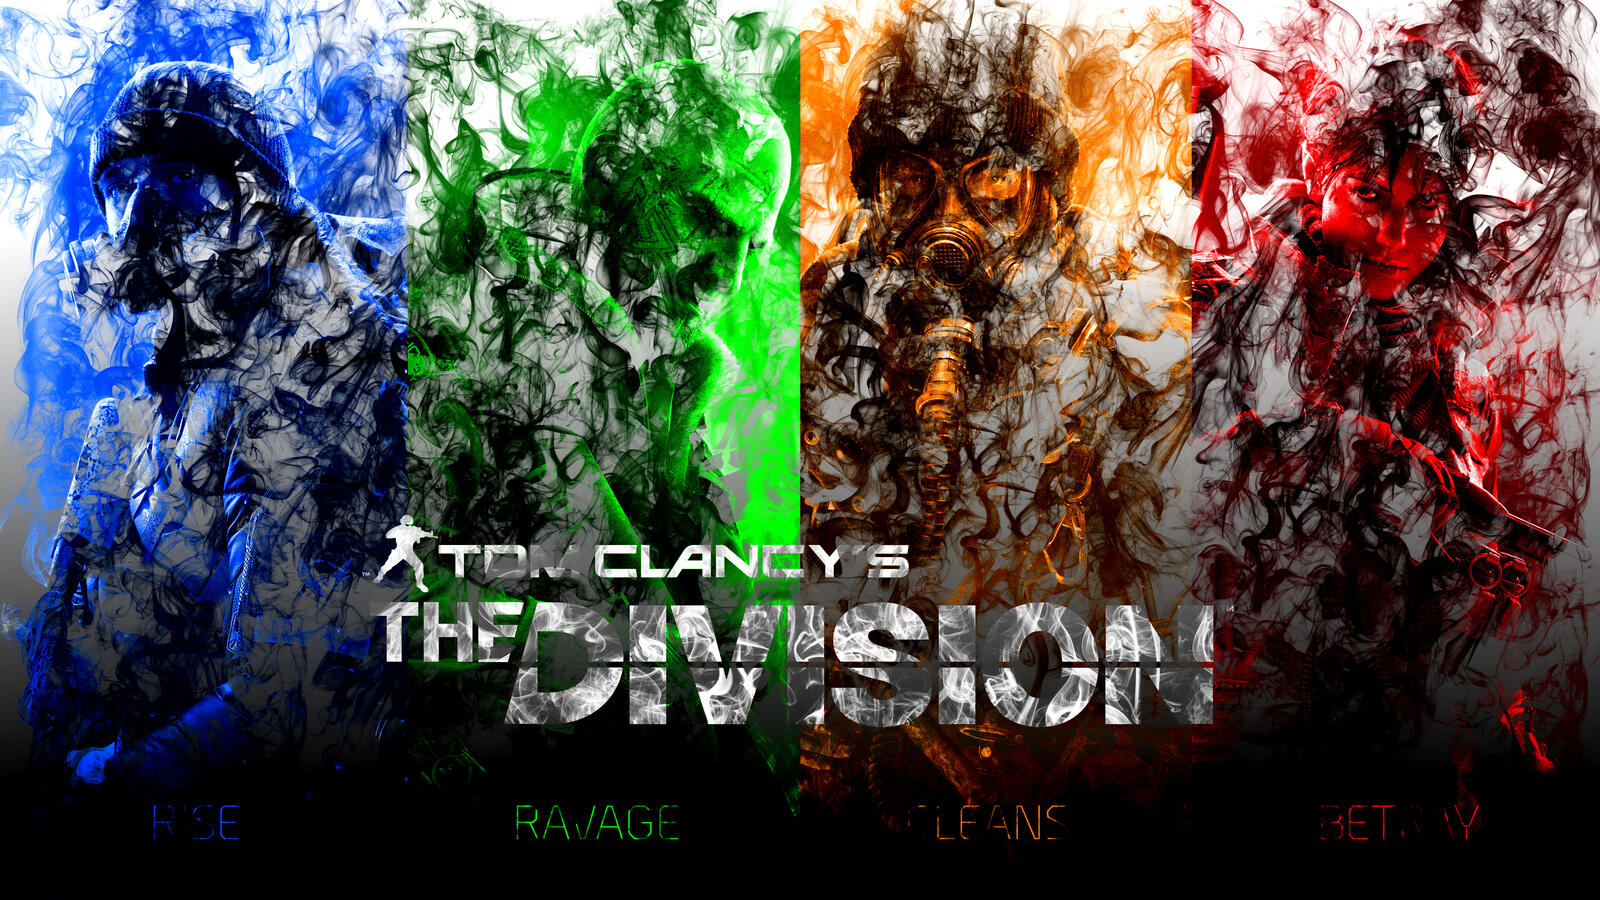 Wallpapers Tom Clancys The Division Xbox games computer games on the desktop